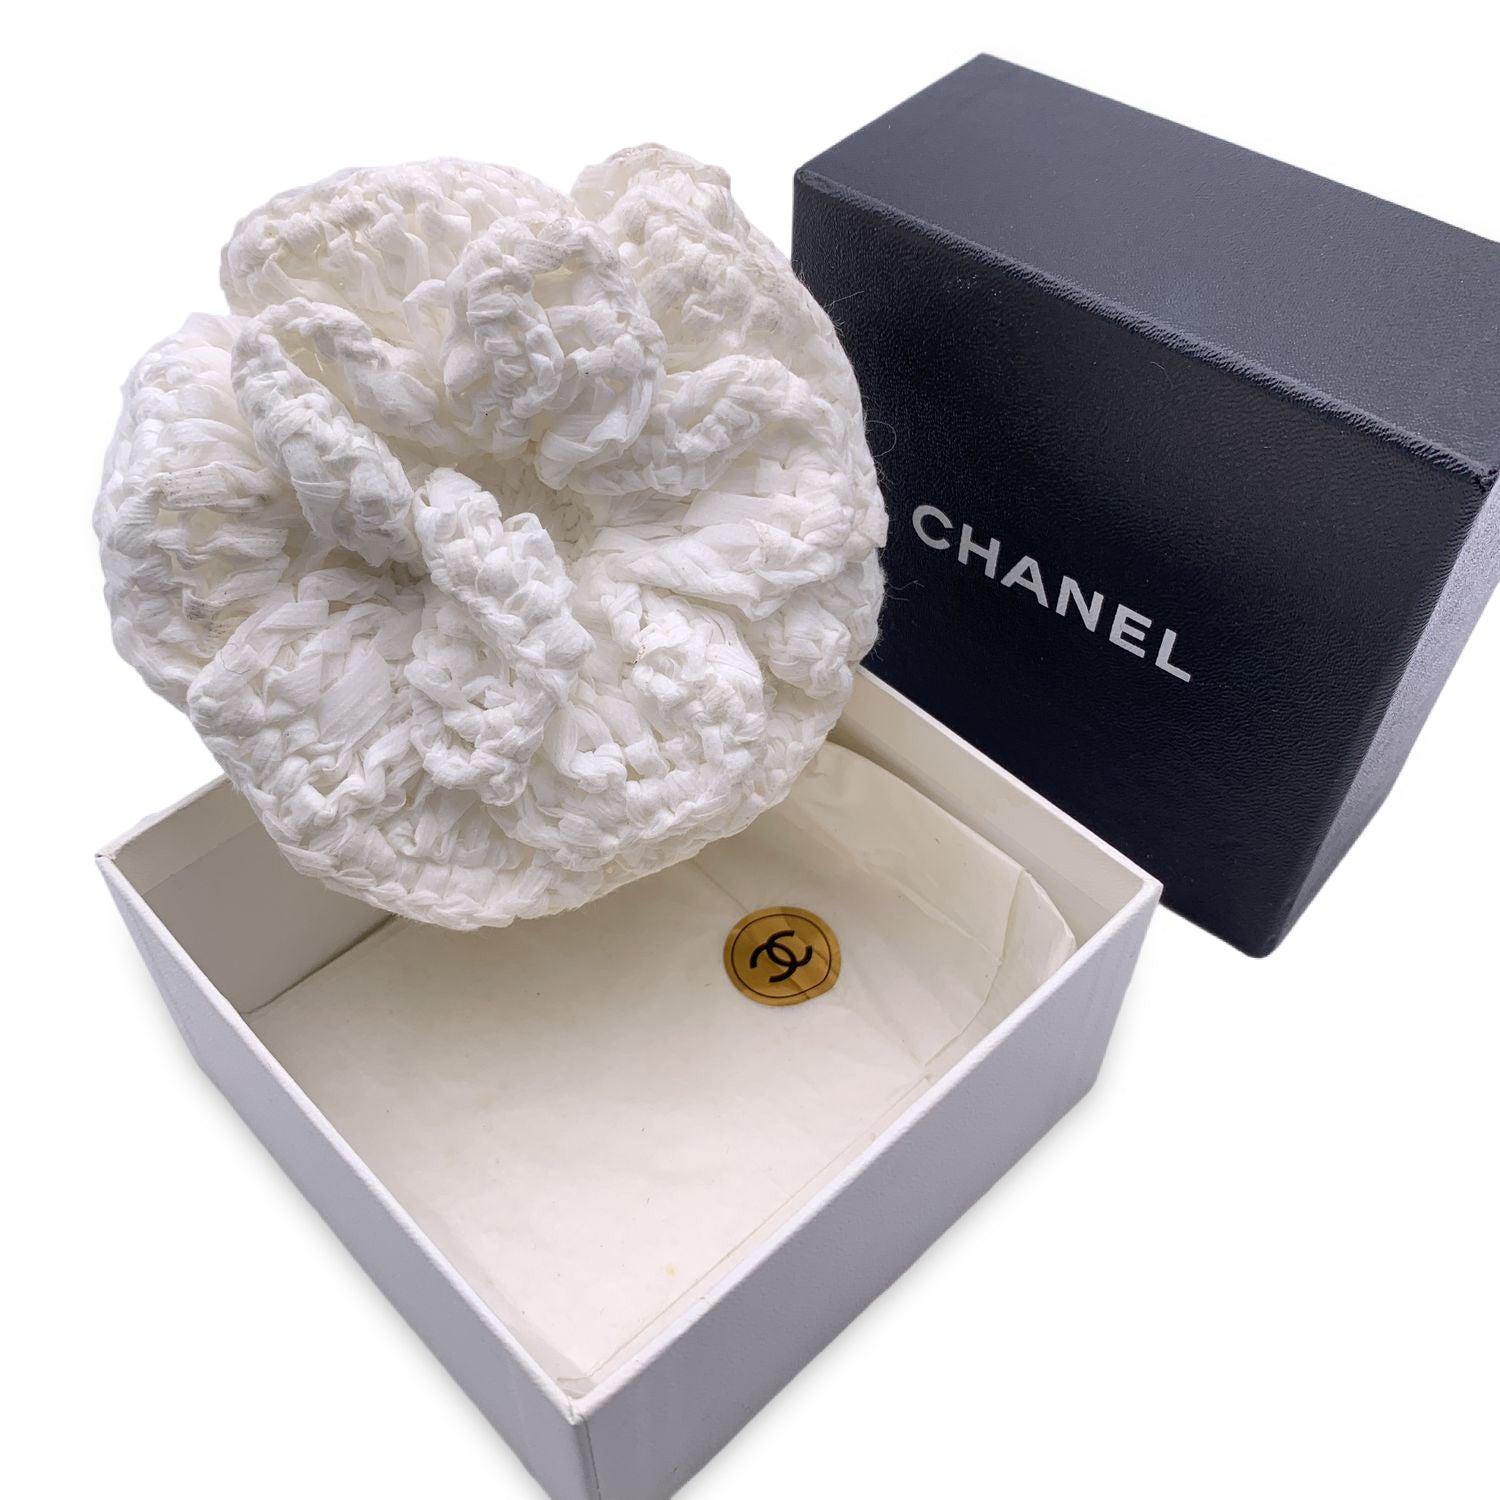 Lovely vintage CHANEL Crochet Camellia Brooch in white color. 'Chanel CC Made in France' oval tab on the back. Flower width 4.5 inches -11.5 cm Condition A - EXCELLENT Gently used. Chanel box included. Please check the photos carefully and ask if